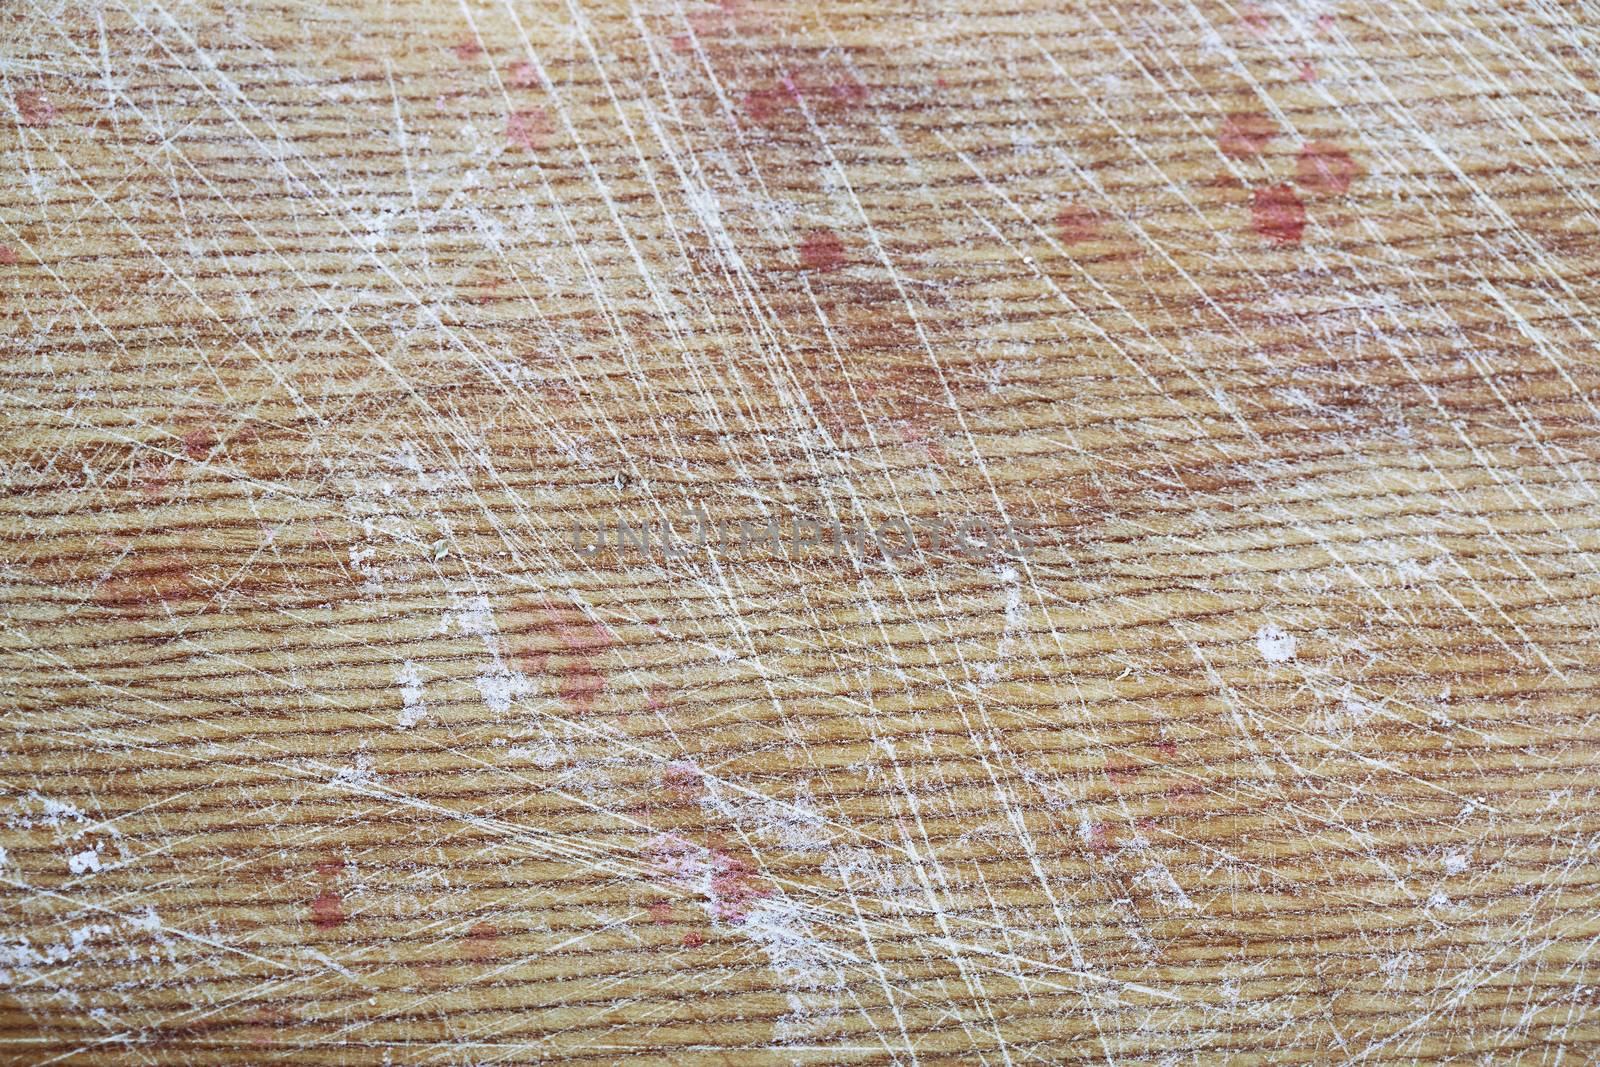 Texture of the scratched wood with blood stains